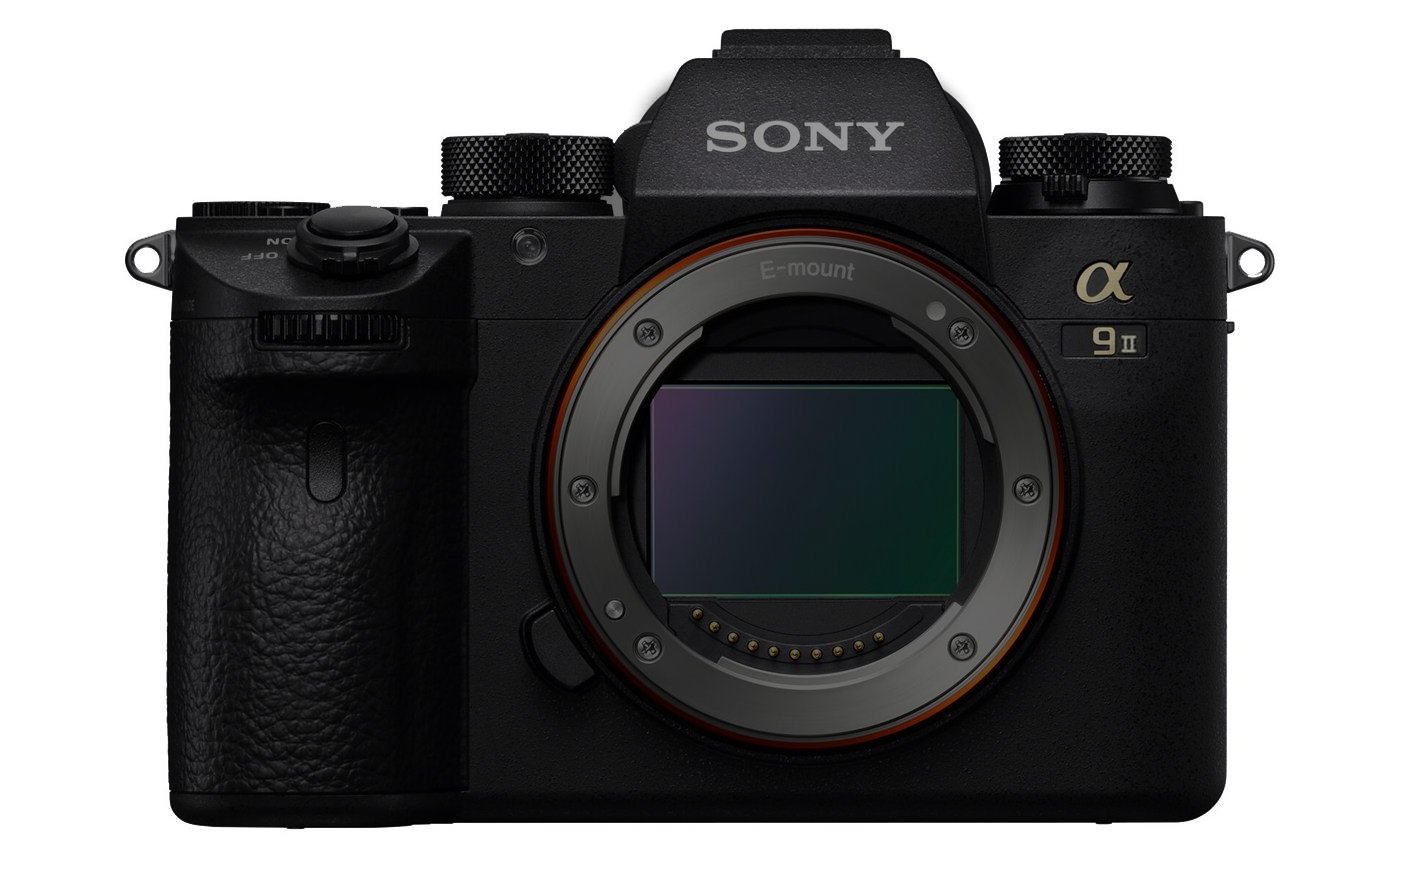 Sony to Announce Either the a9 II or a7S III in 1-2 Weeks: Report